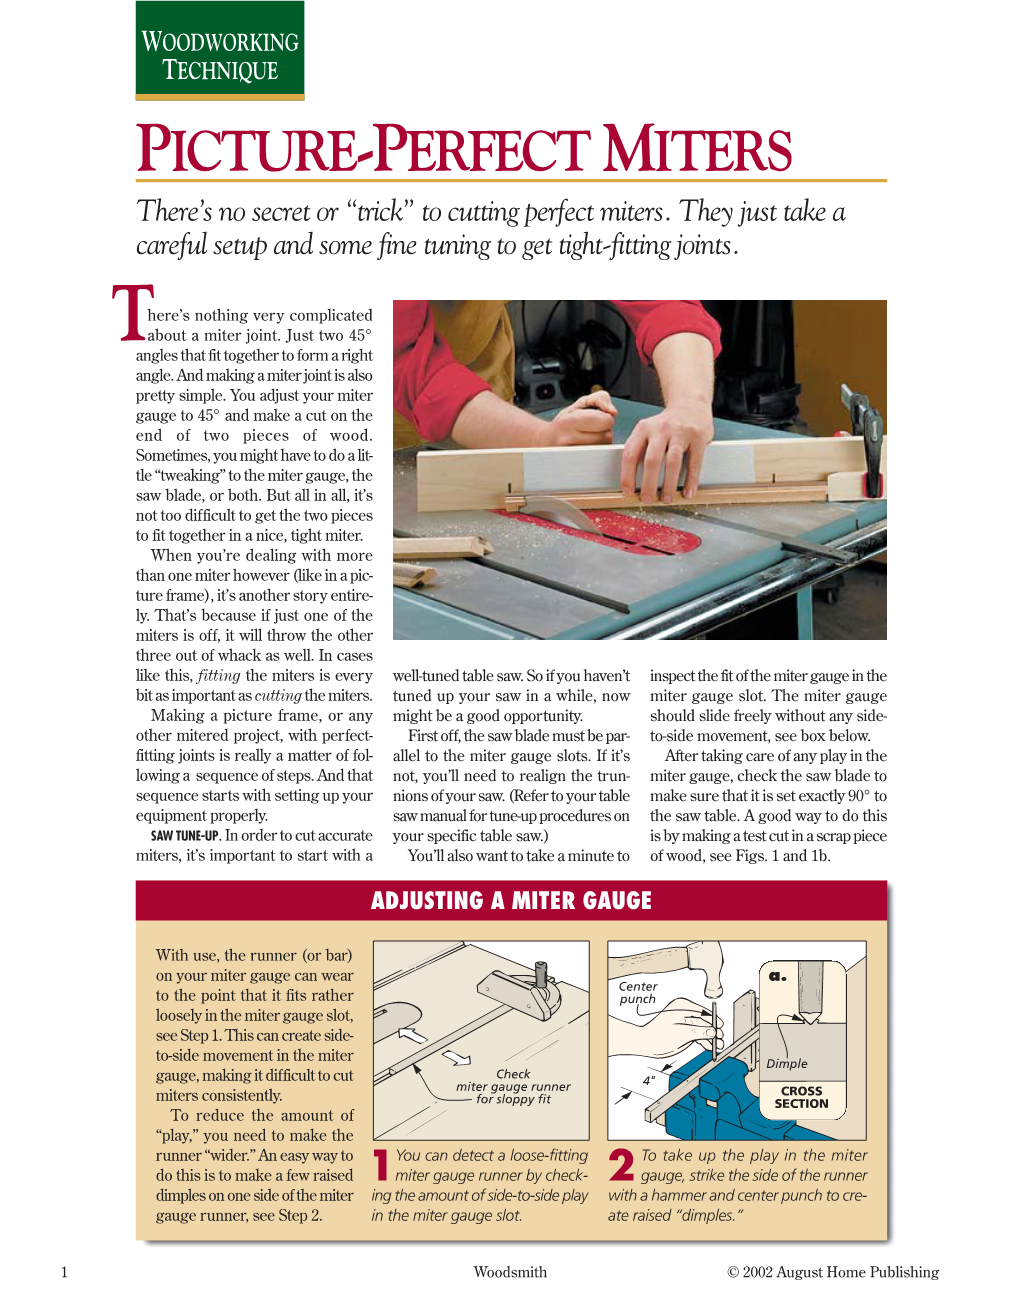 PICTURE-PERFECT MITERS There’S No Secret Or “Trick” to Cutting Perfect Miters